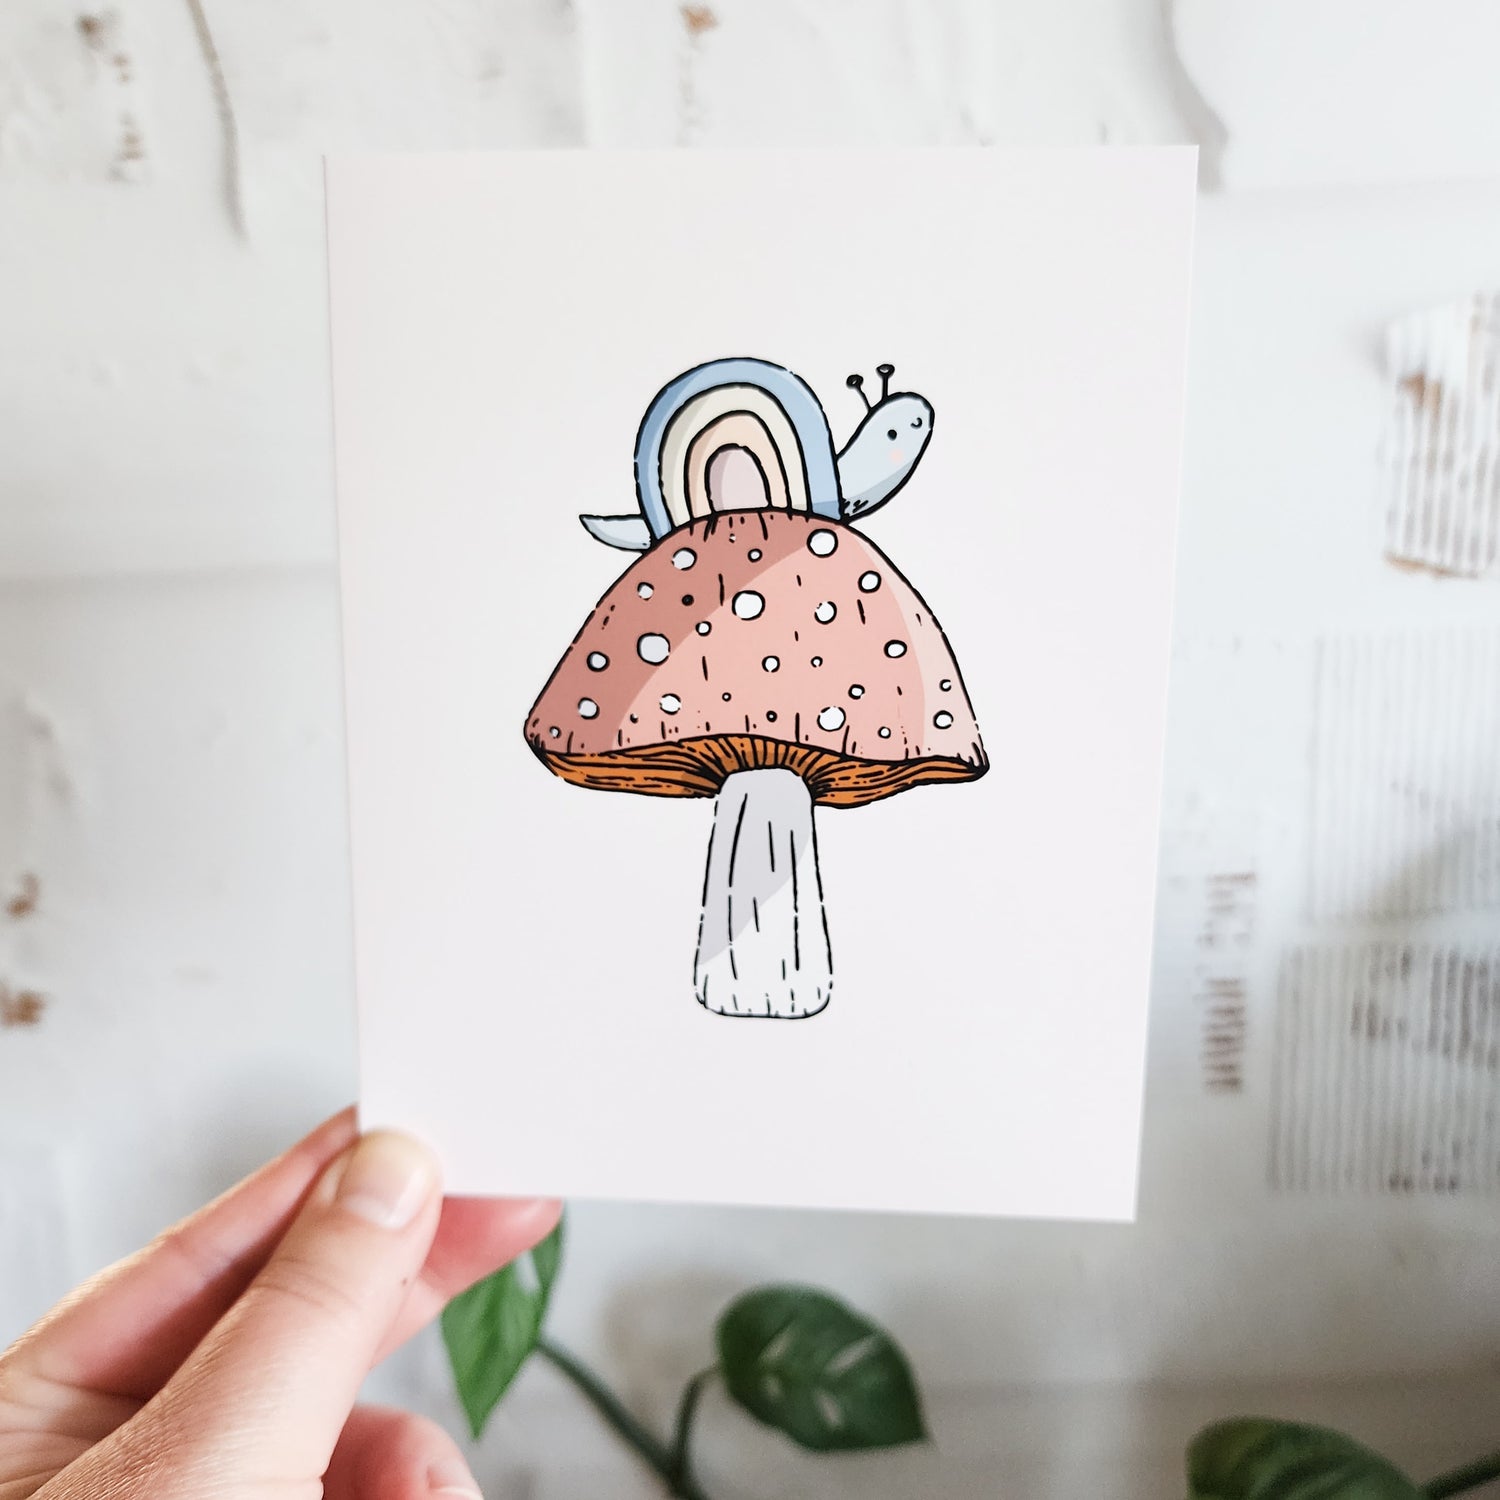 rainbow snail greeting card held in a hand